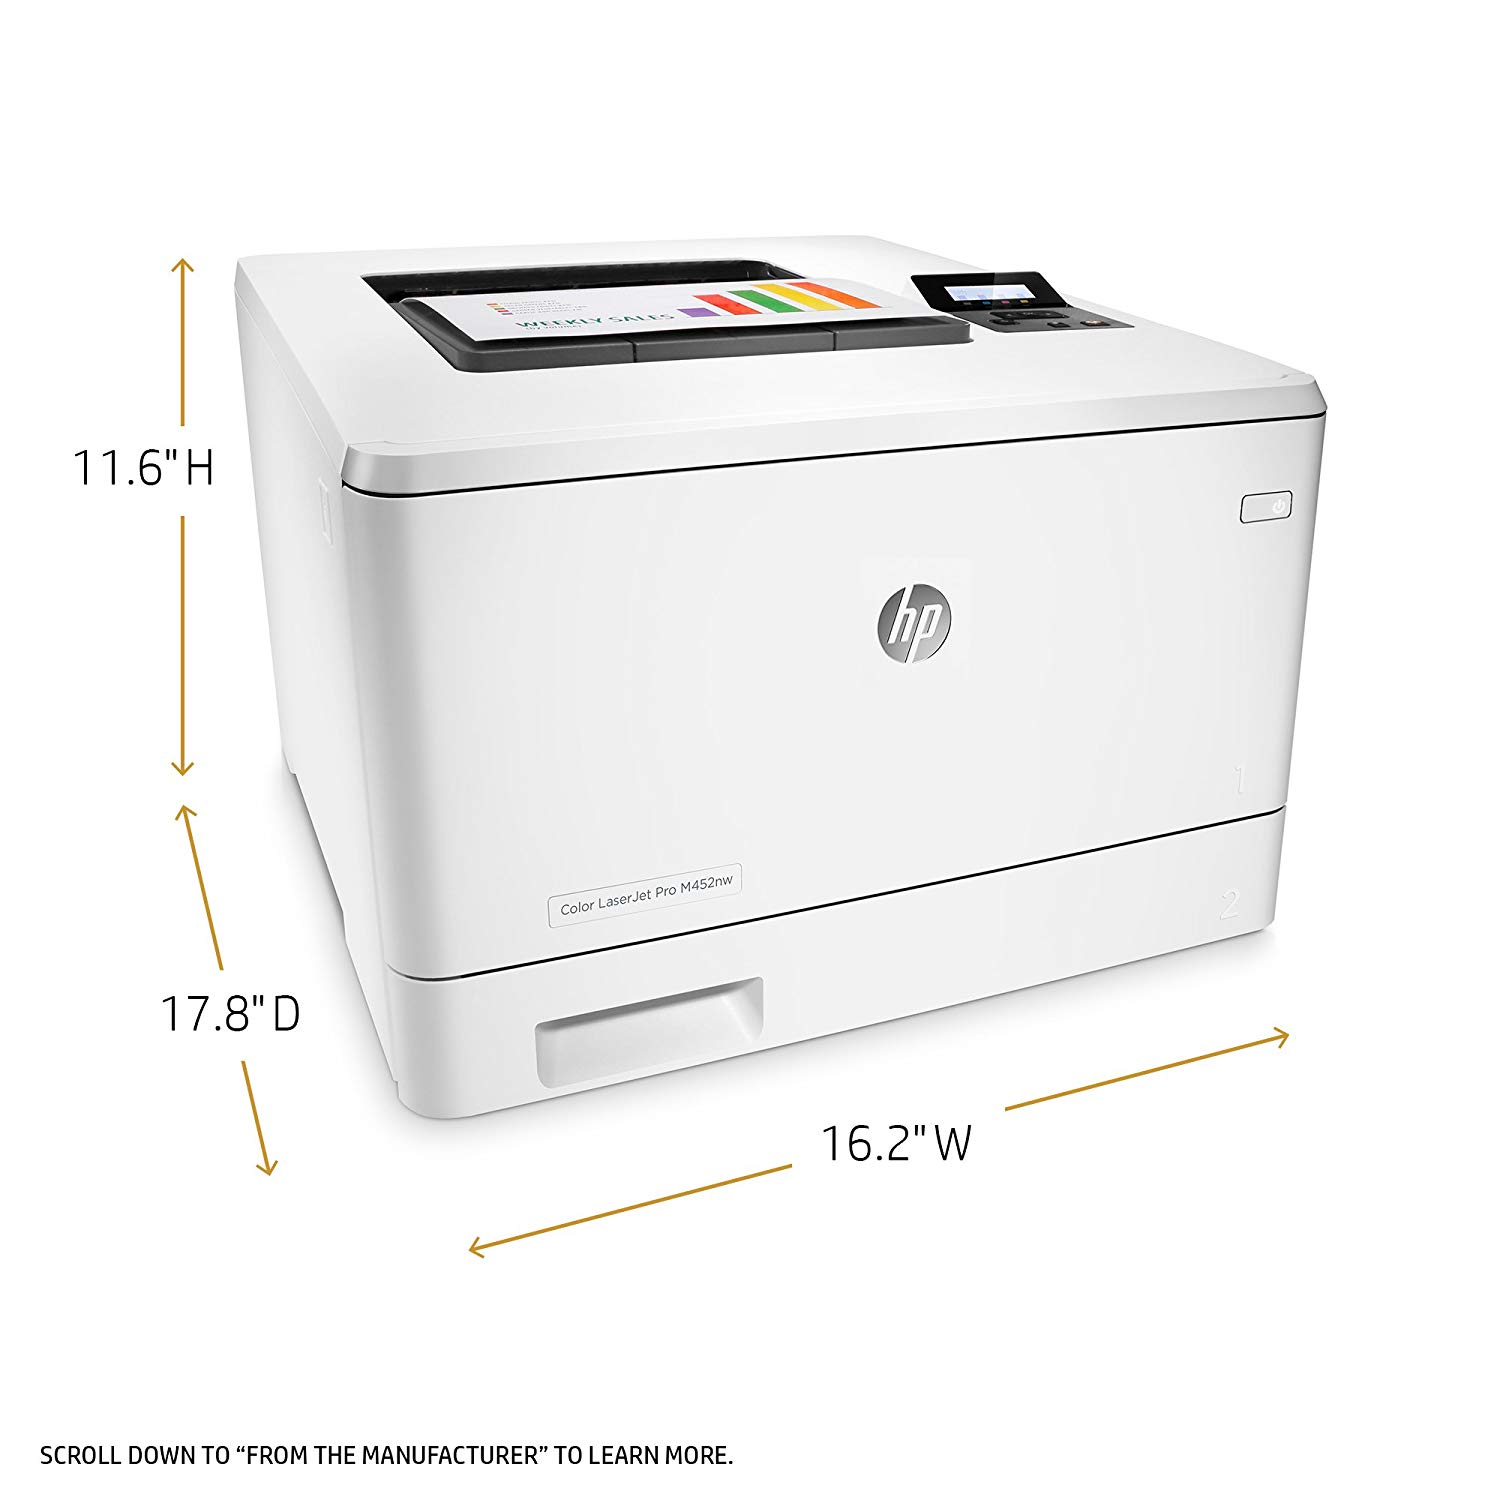 HP Laserjet Pro M452nw Wireless Color Laser Printer with Built-in Ethernet (CF388A) - image 5 of 5